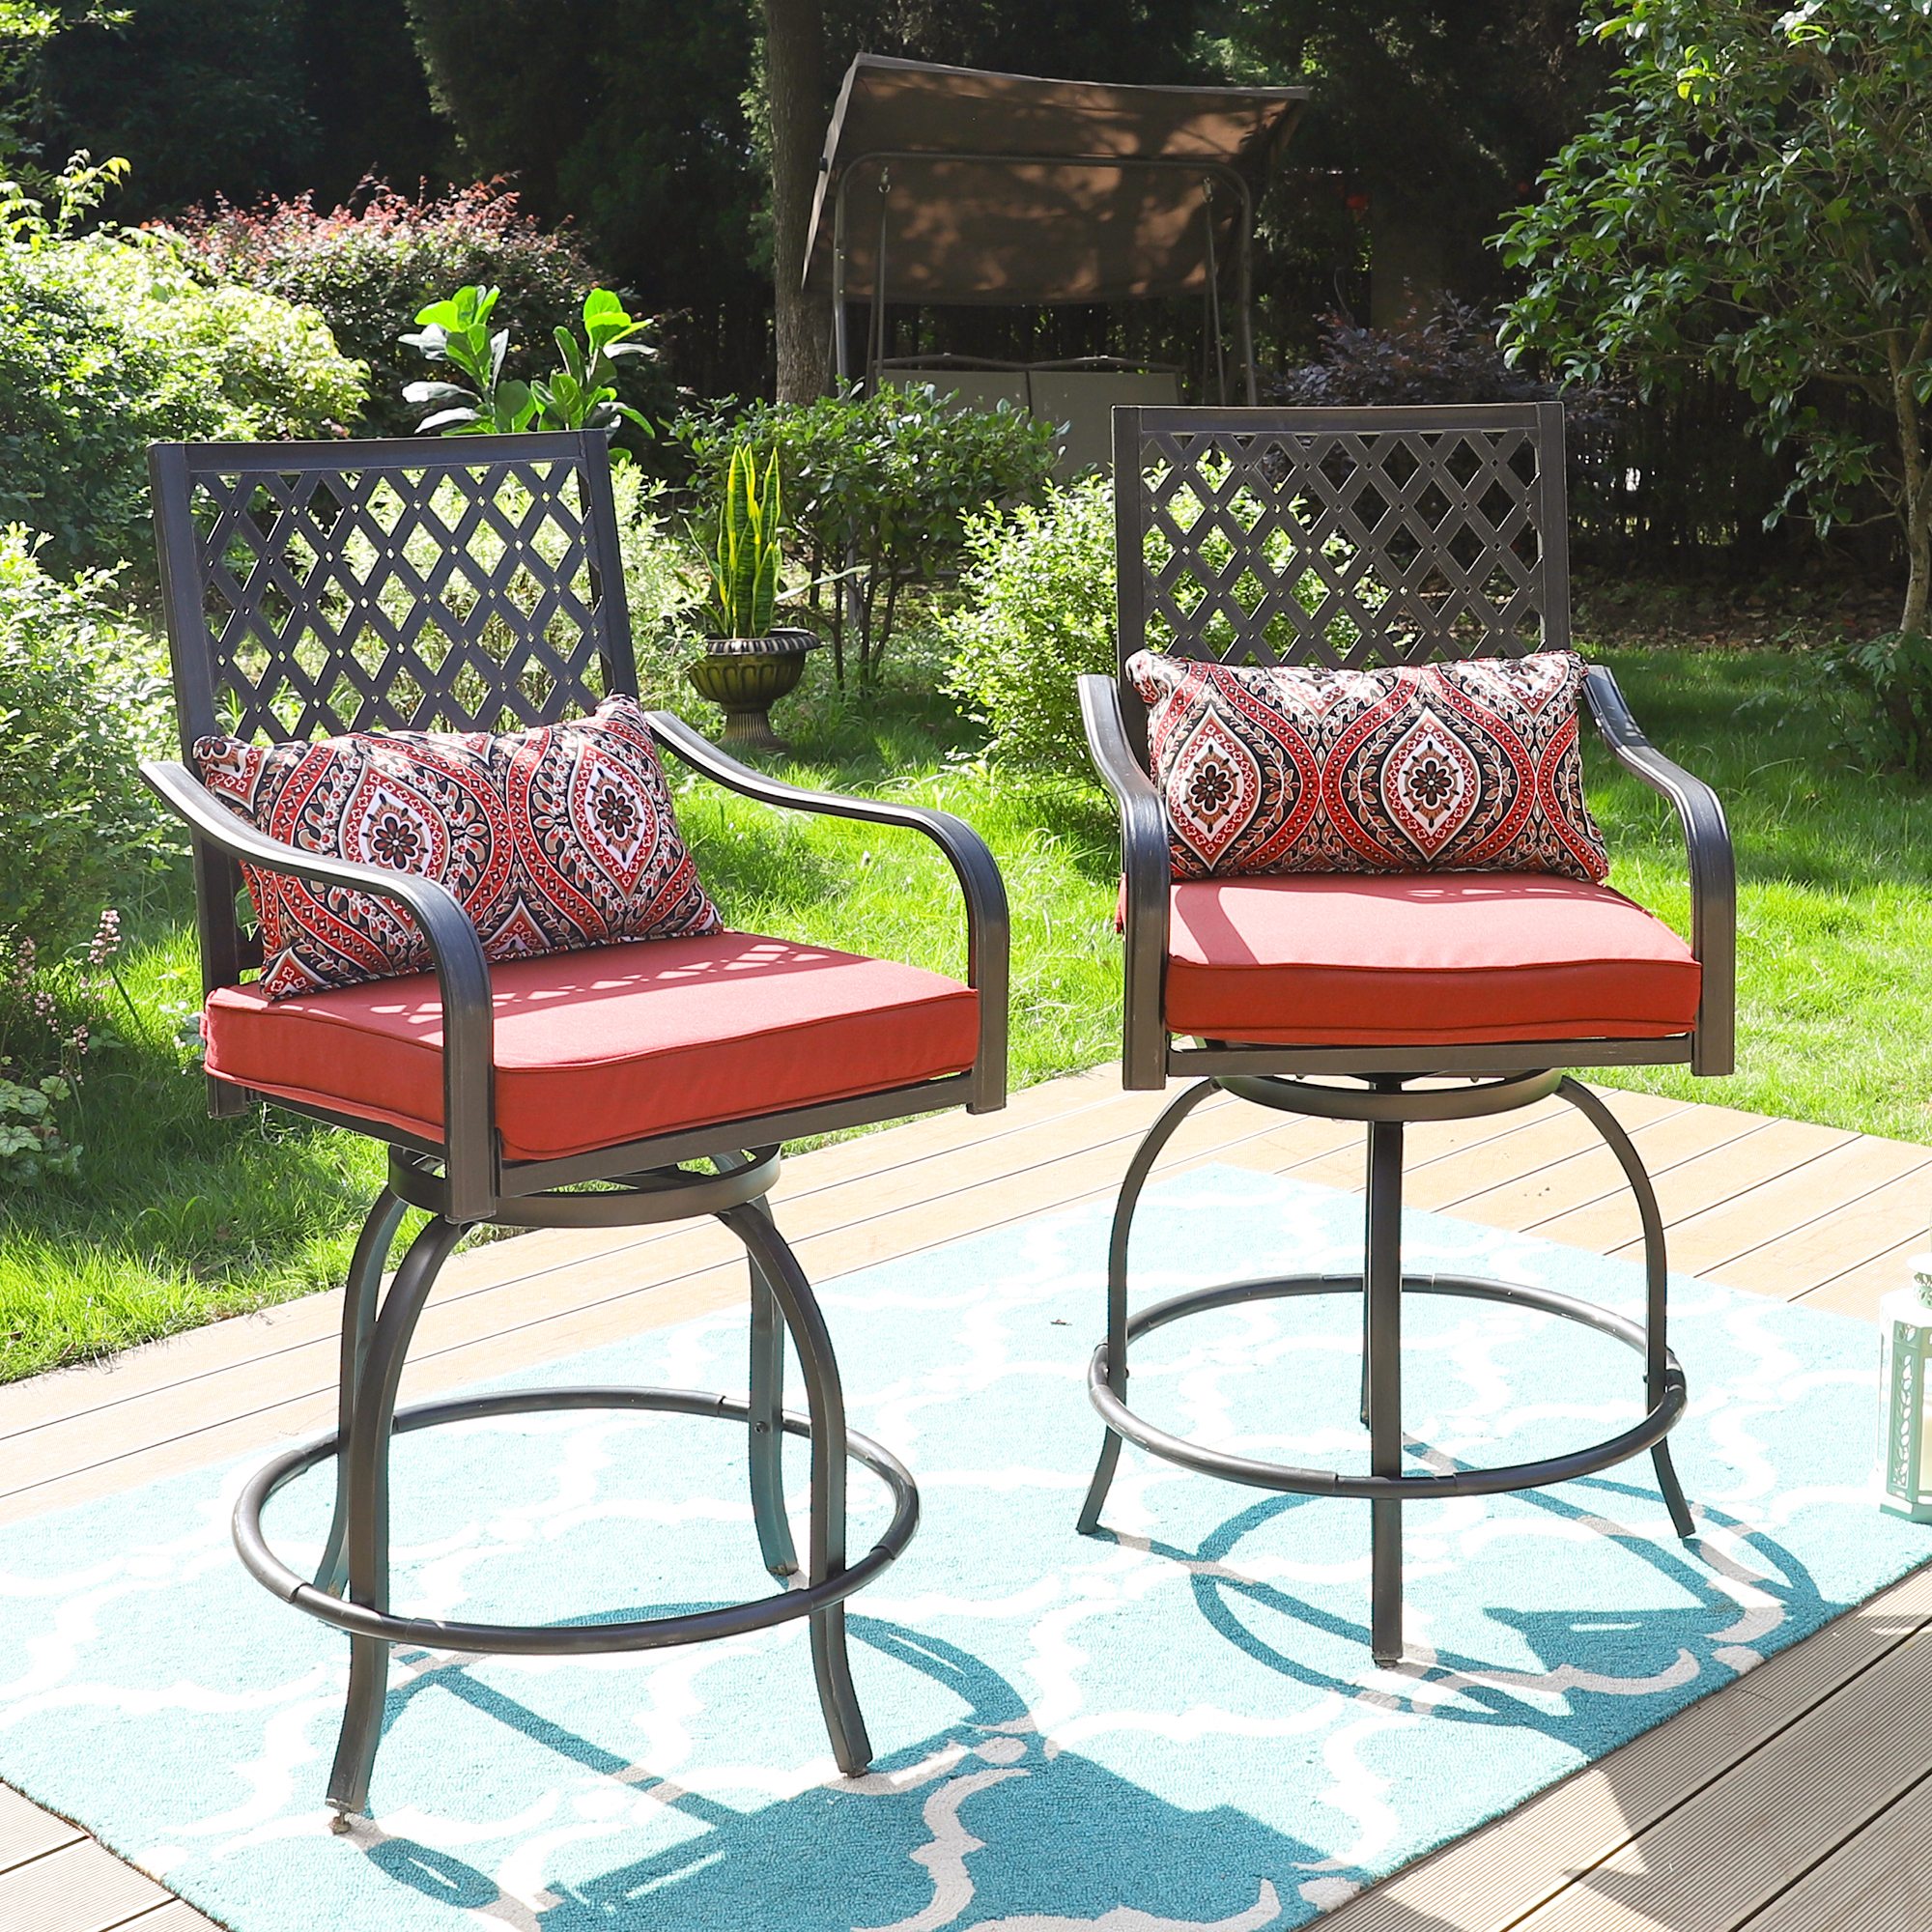 MF Studio 2PCS Patio Dining Chairs Outdoor Furniture Extra Wide Height Swivel Bar Stools Suitable for Patio, Garden, Porch and Dining Room with Red Cushion - image 1 of 6